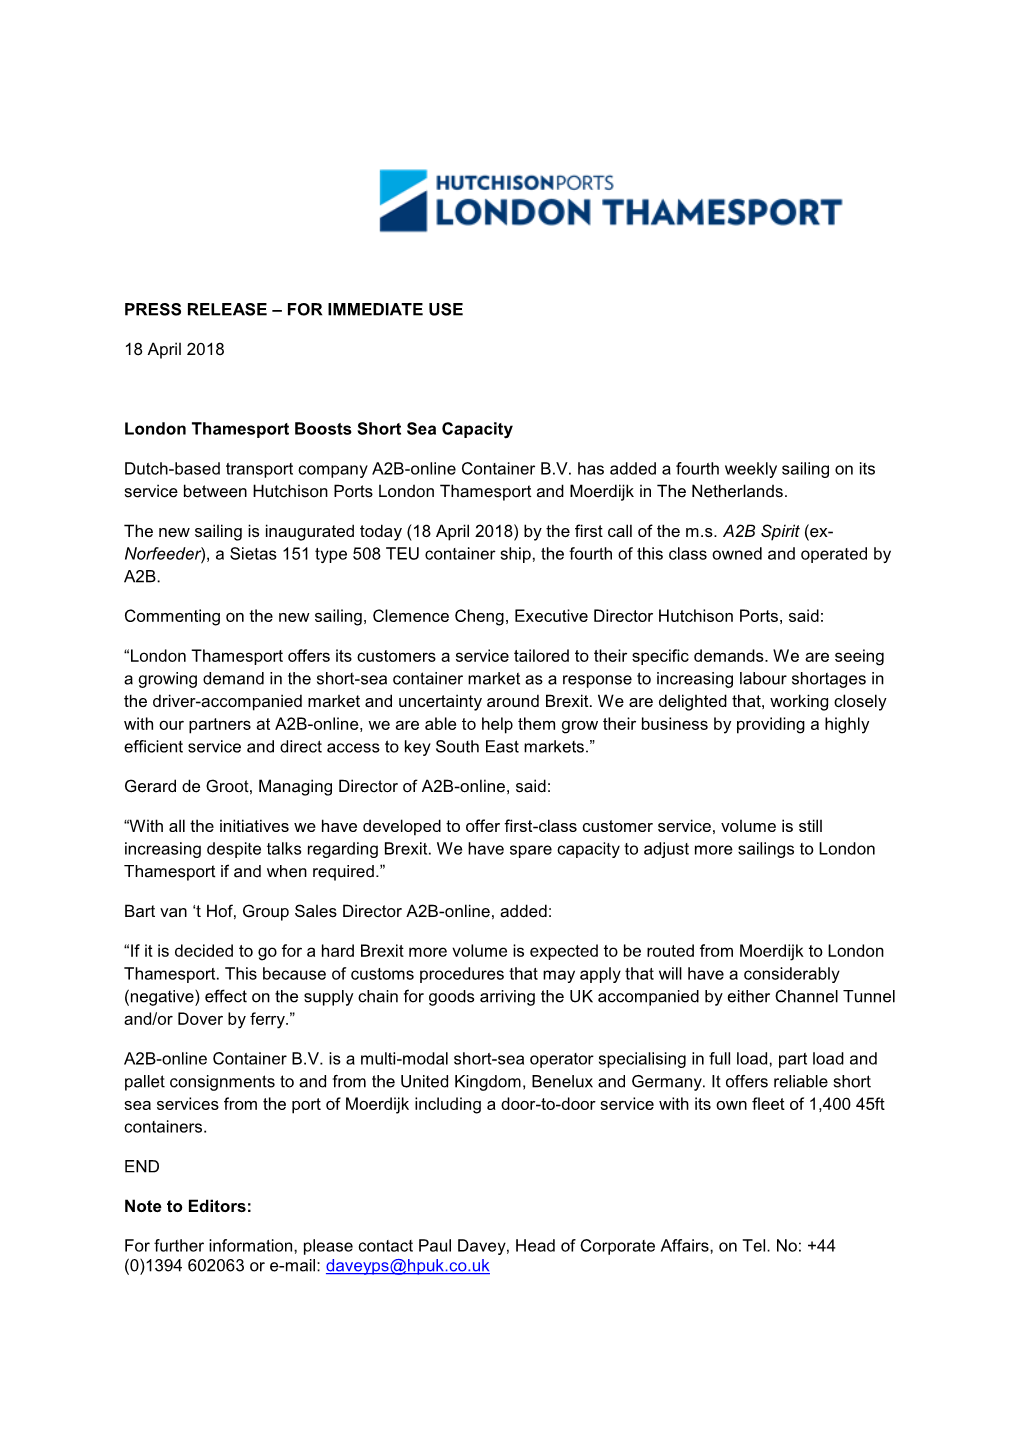 PRESS RELEASE – for IMMEDIATE USE 18 April 2018 London Thamesport Boosts Short Sea Capacity Dutch-Based Transport Company